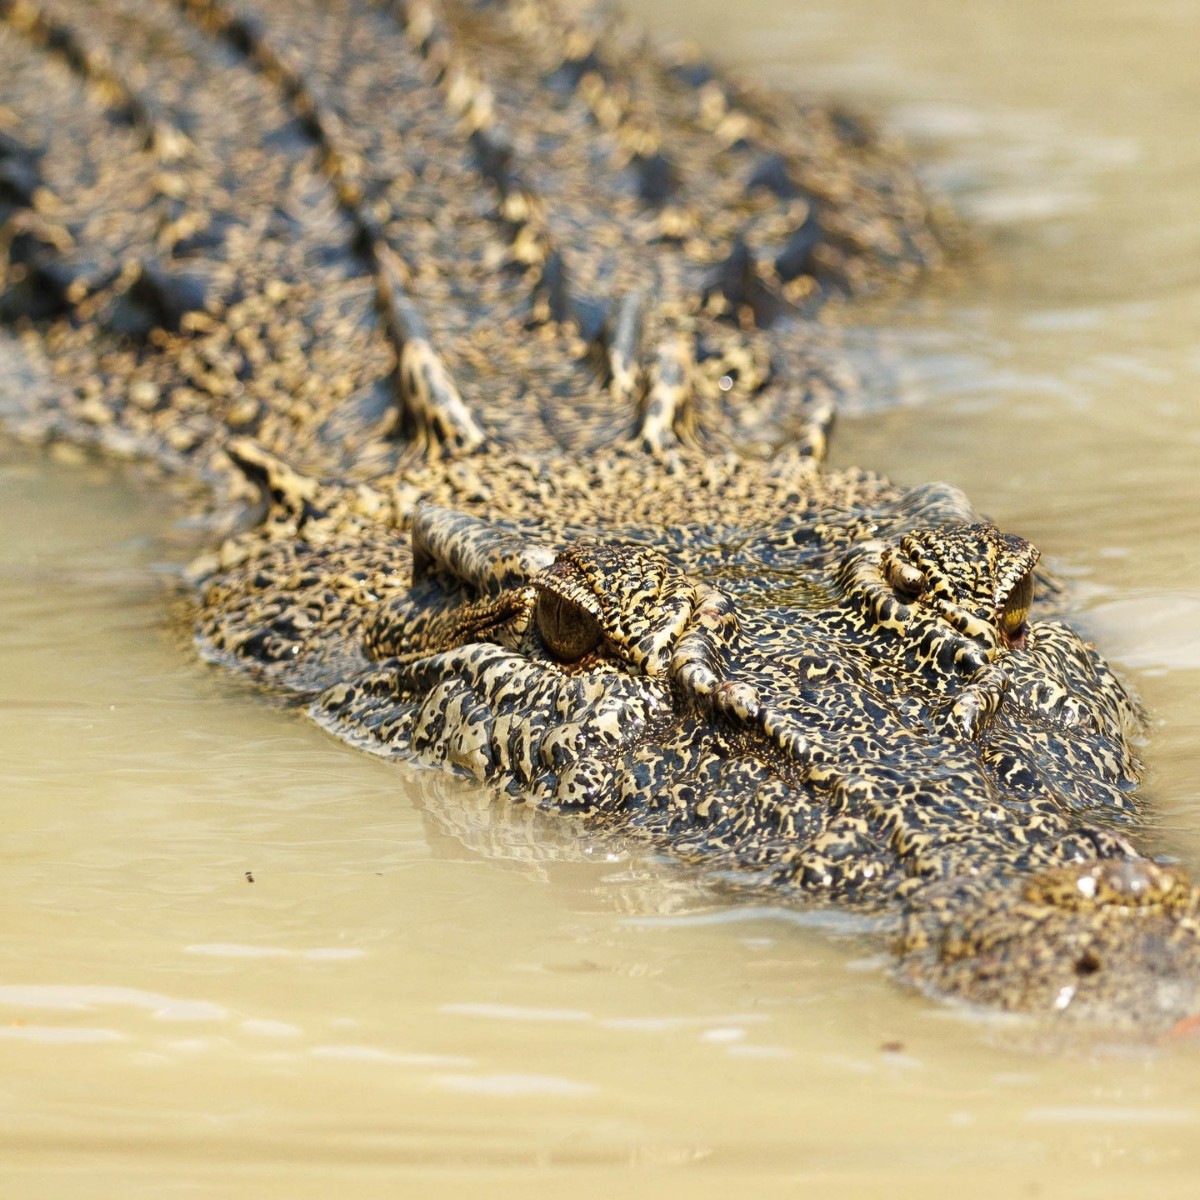 Crocodiles have sharp vision during day time ☀️, but they also have their own built-in night vision 🌙. Crocodiles can even see underwater. In local language, crocodiles 🐊 are called kingas (pronounced ging-us). 📸 Images captured at Cahill's Crossing by @patroln_downunder